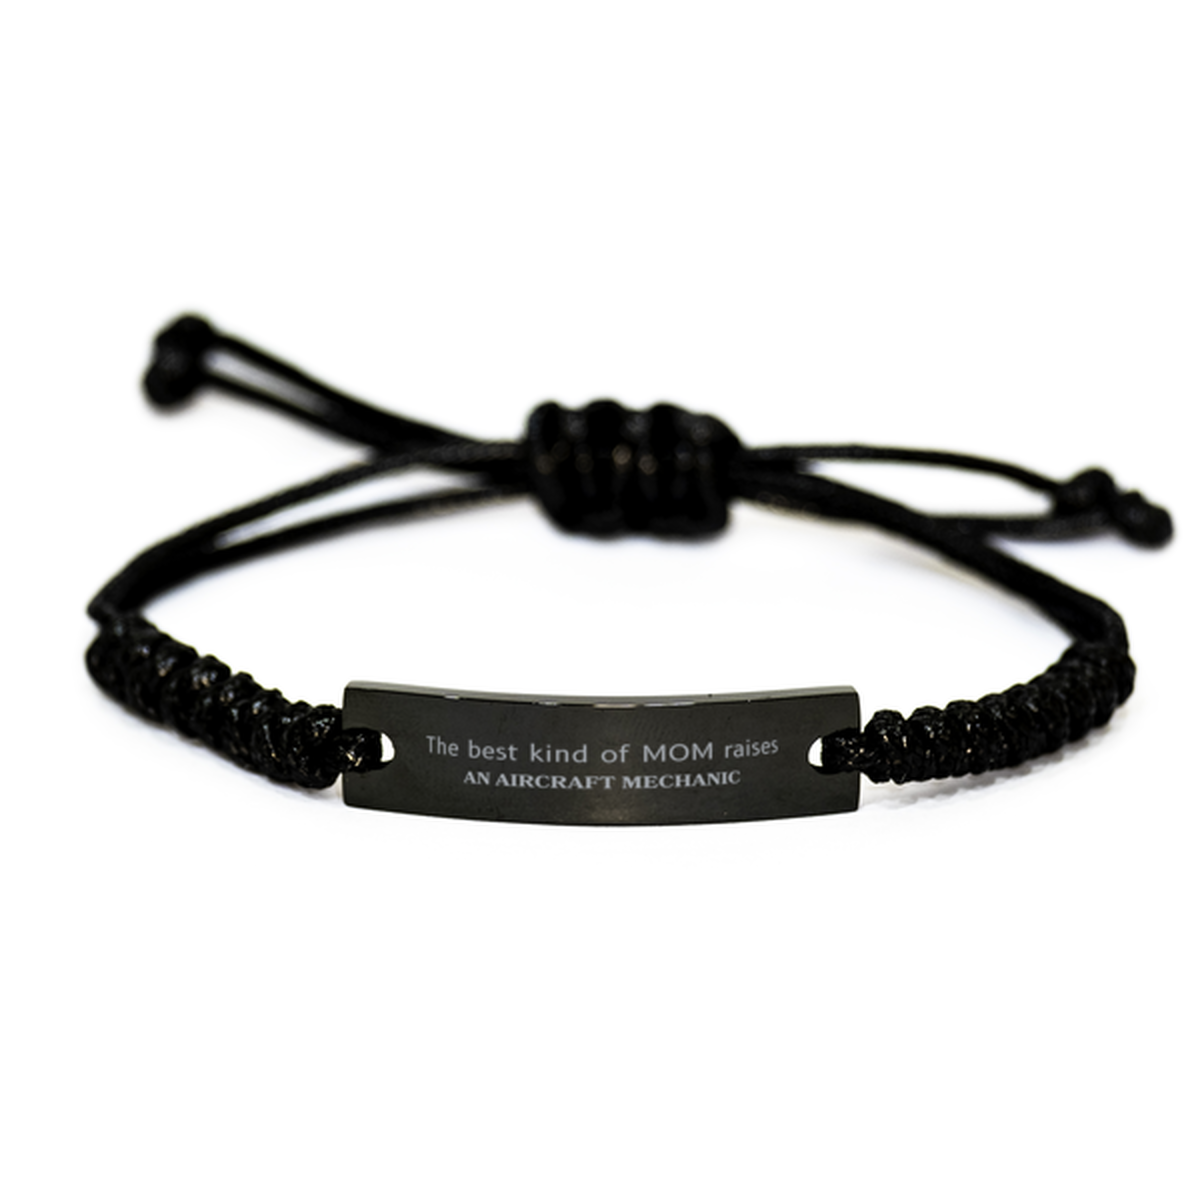 Funny Aircraft Mechanic Mom Gifts, The best kind of MOM raises Aircraft Mechanic, Birthday, Mother's Day, Cute Black Rope Bracelet for Aircraft Mechanic Mom